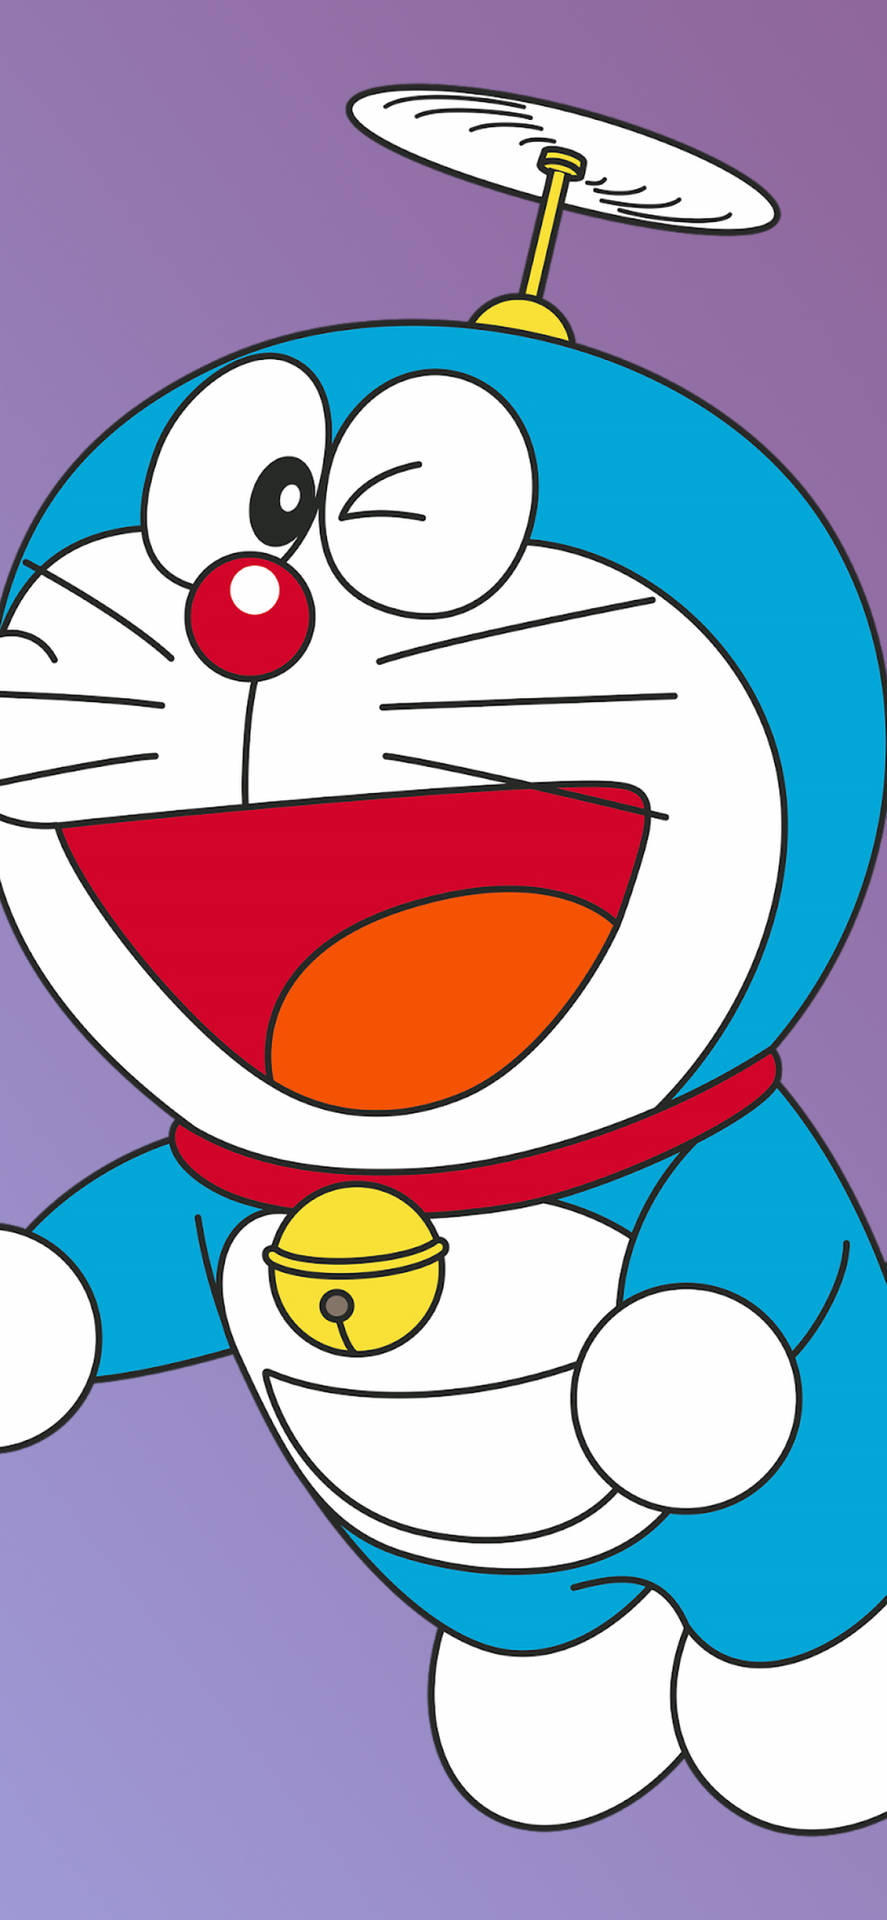 Flying And Winking Doraemon iPhone Wallpaper